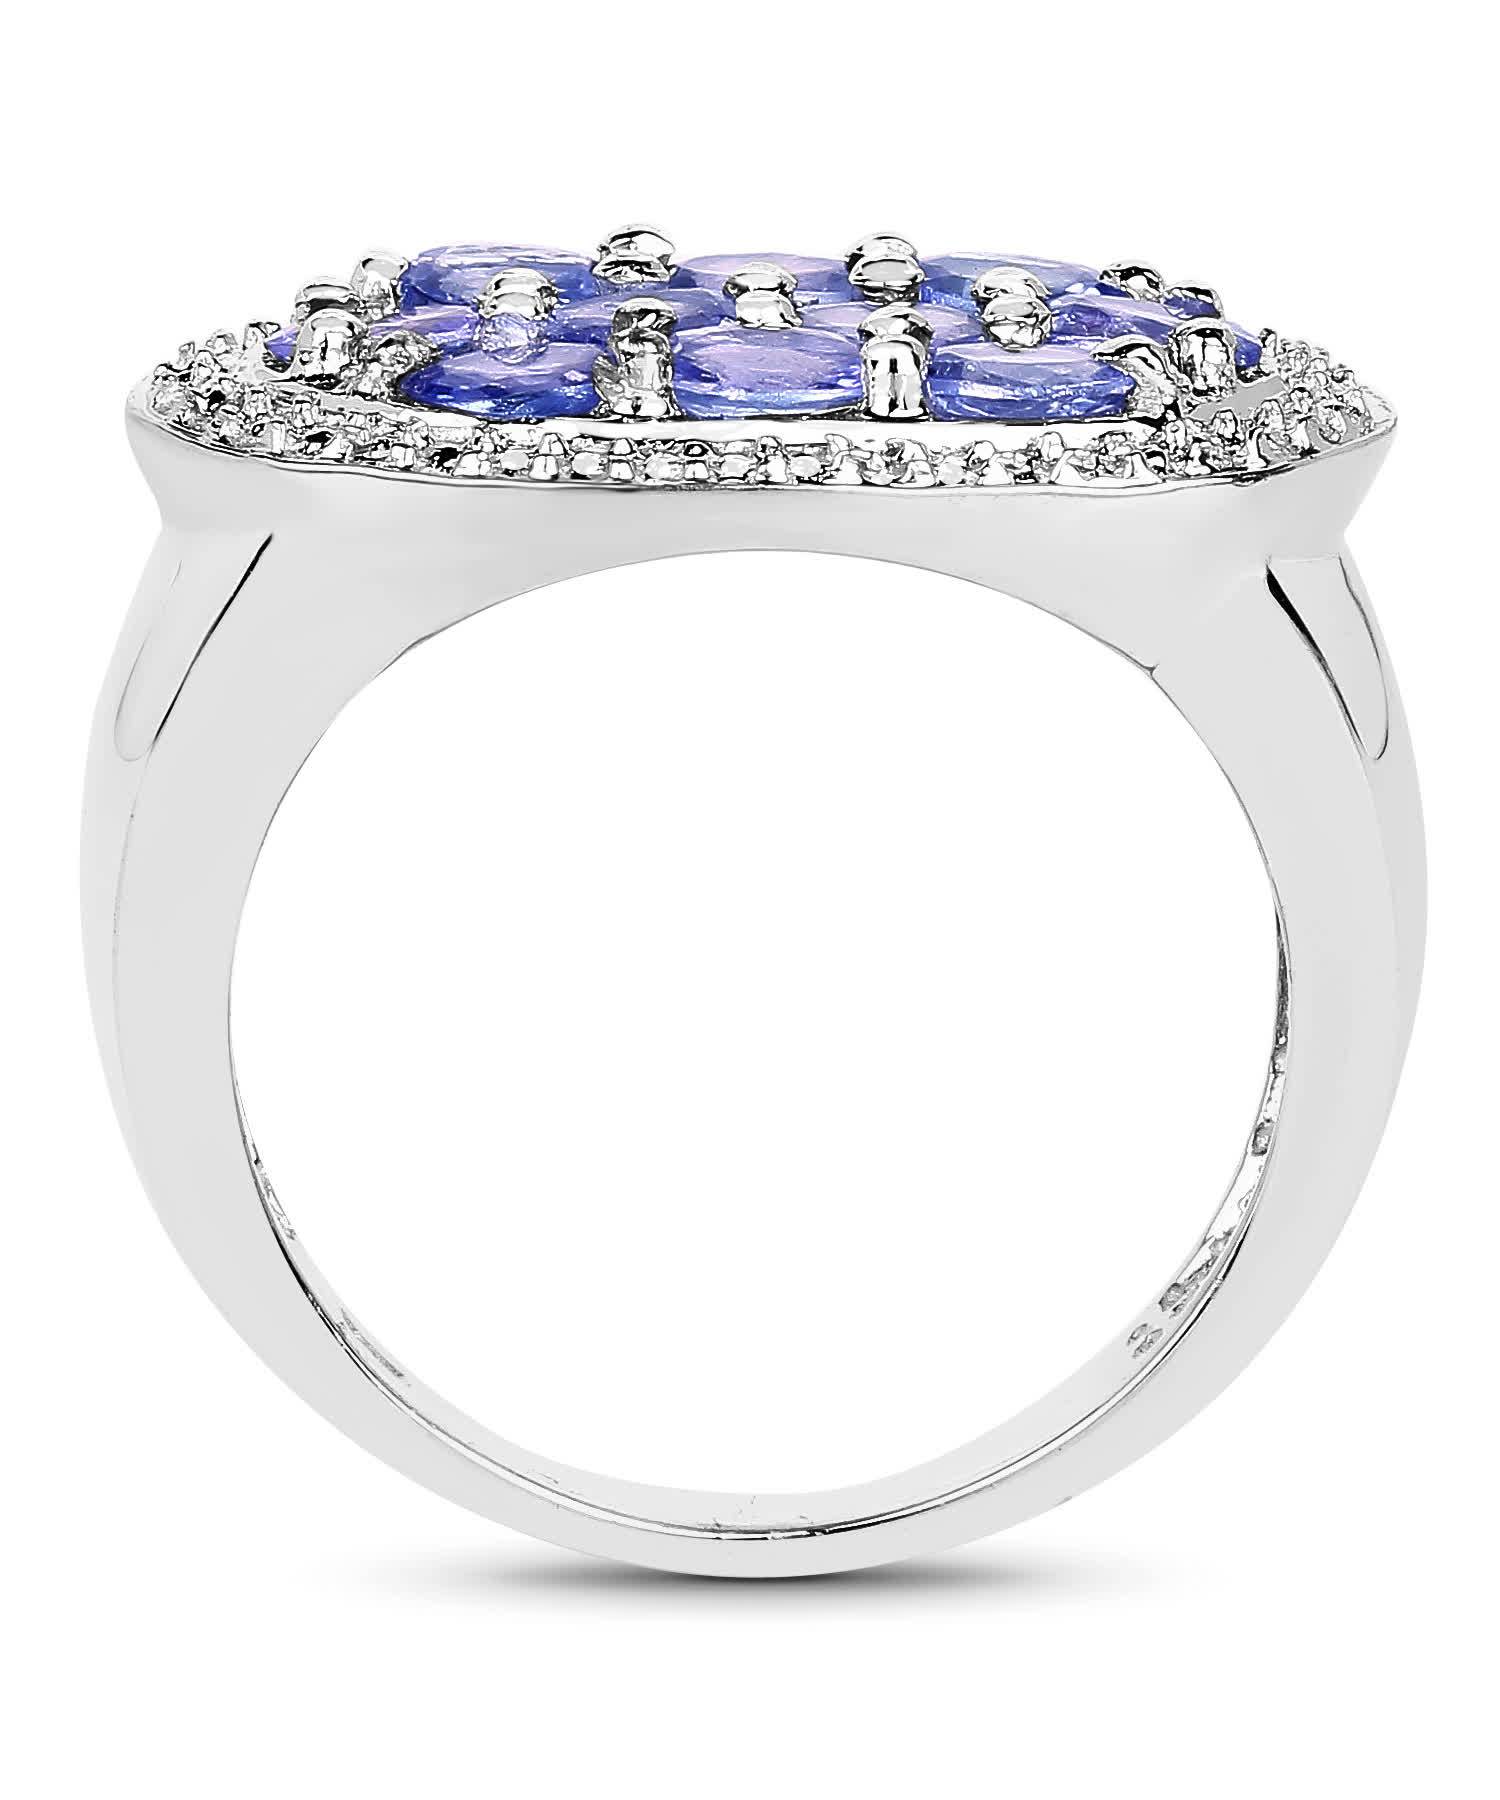 1.70ctw Natural Tanzanite Rhodium Plated 925 Sterling Silver Right Hand Ring View 2